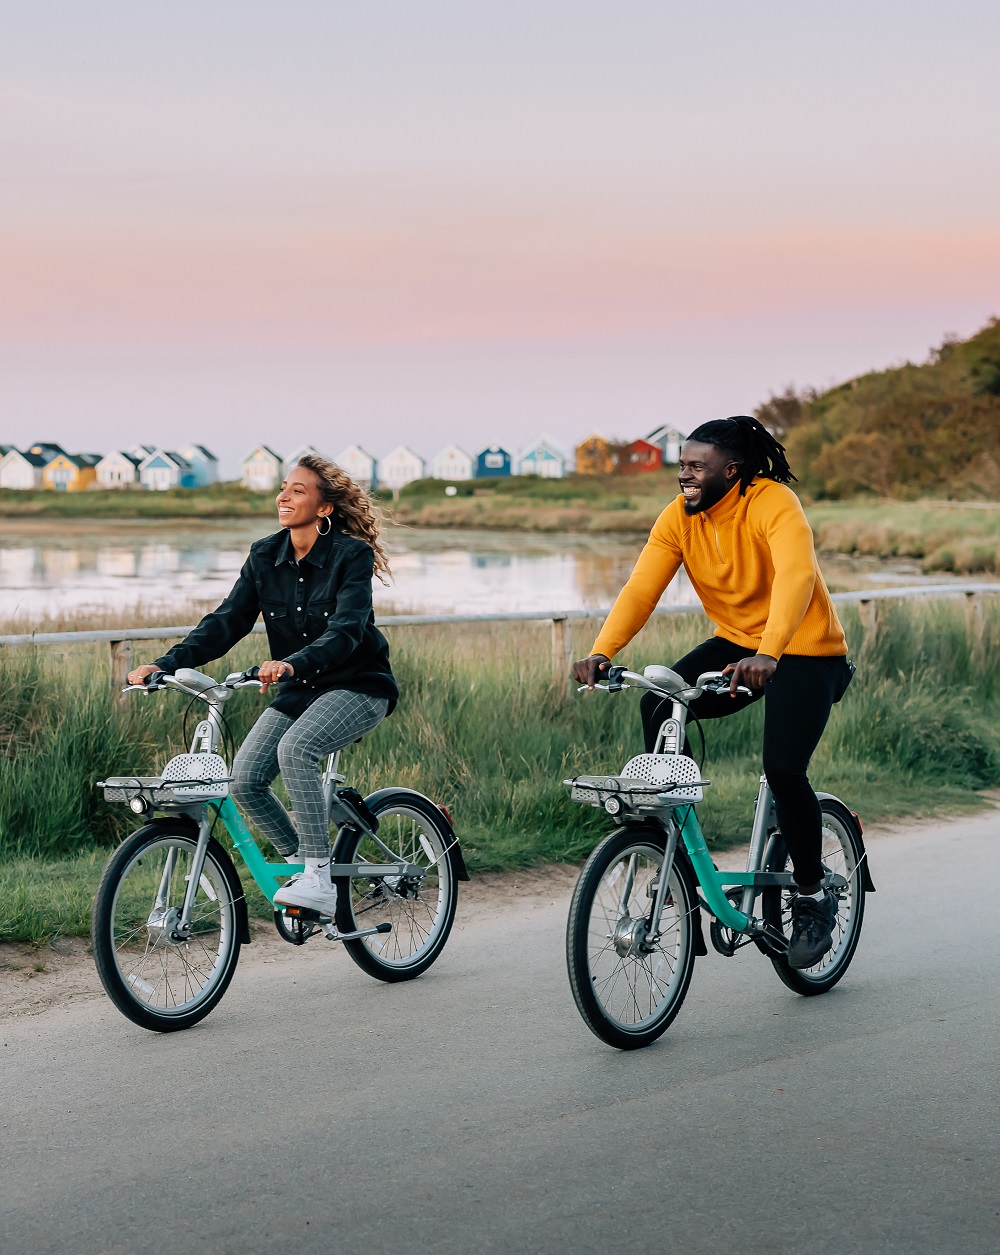 New ‘Park & Cycle’ scheme launches at Kings Park  Bike to the beach on a Beryl for free!